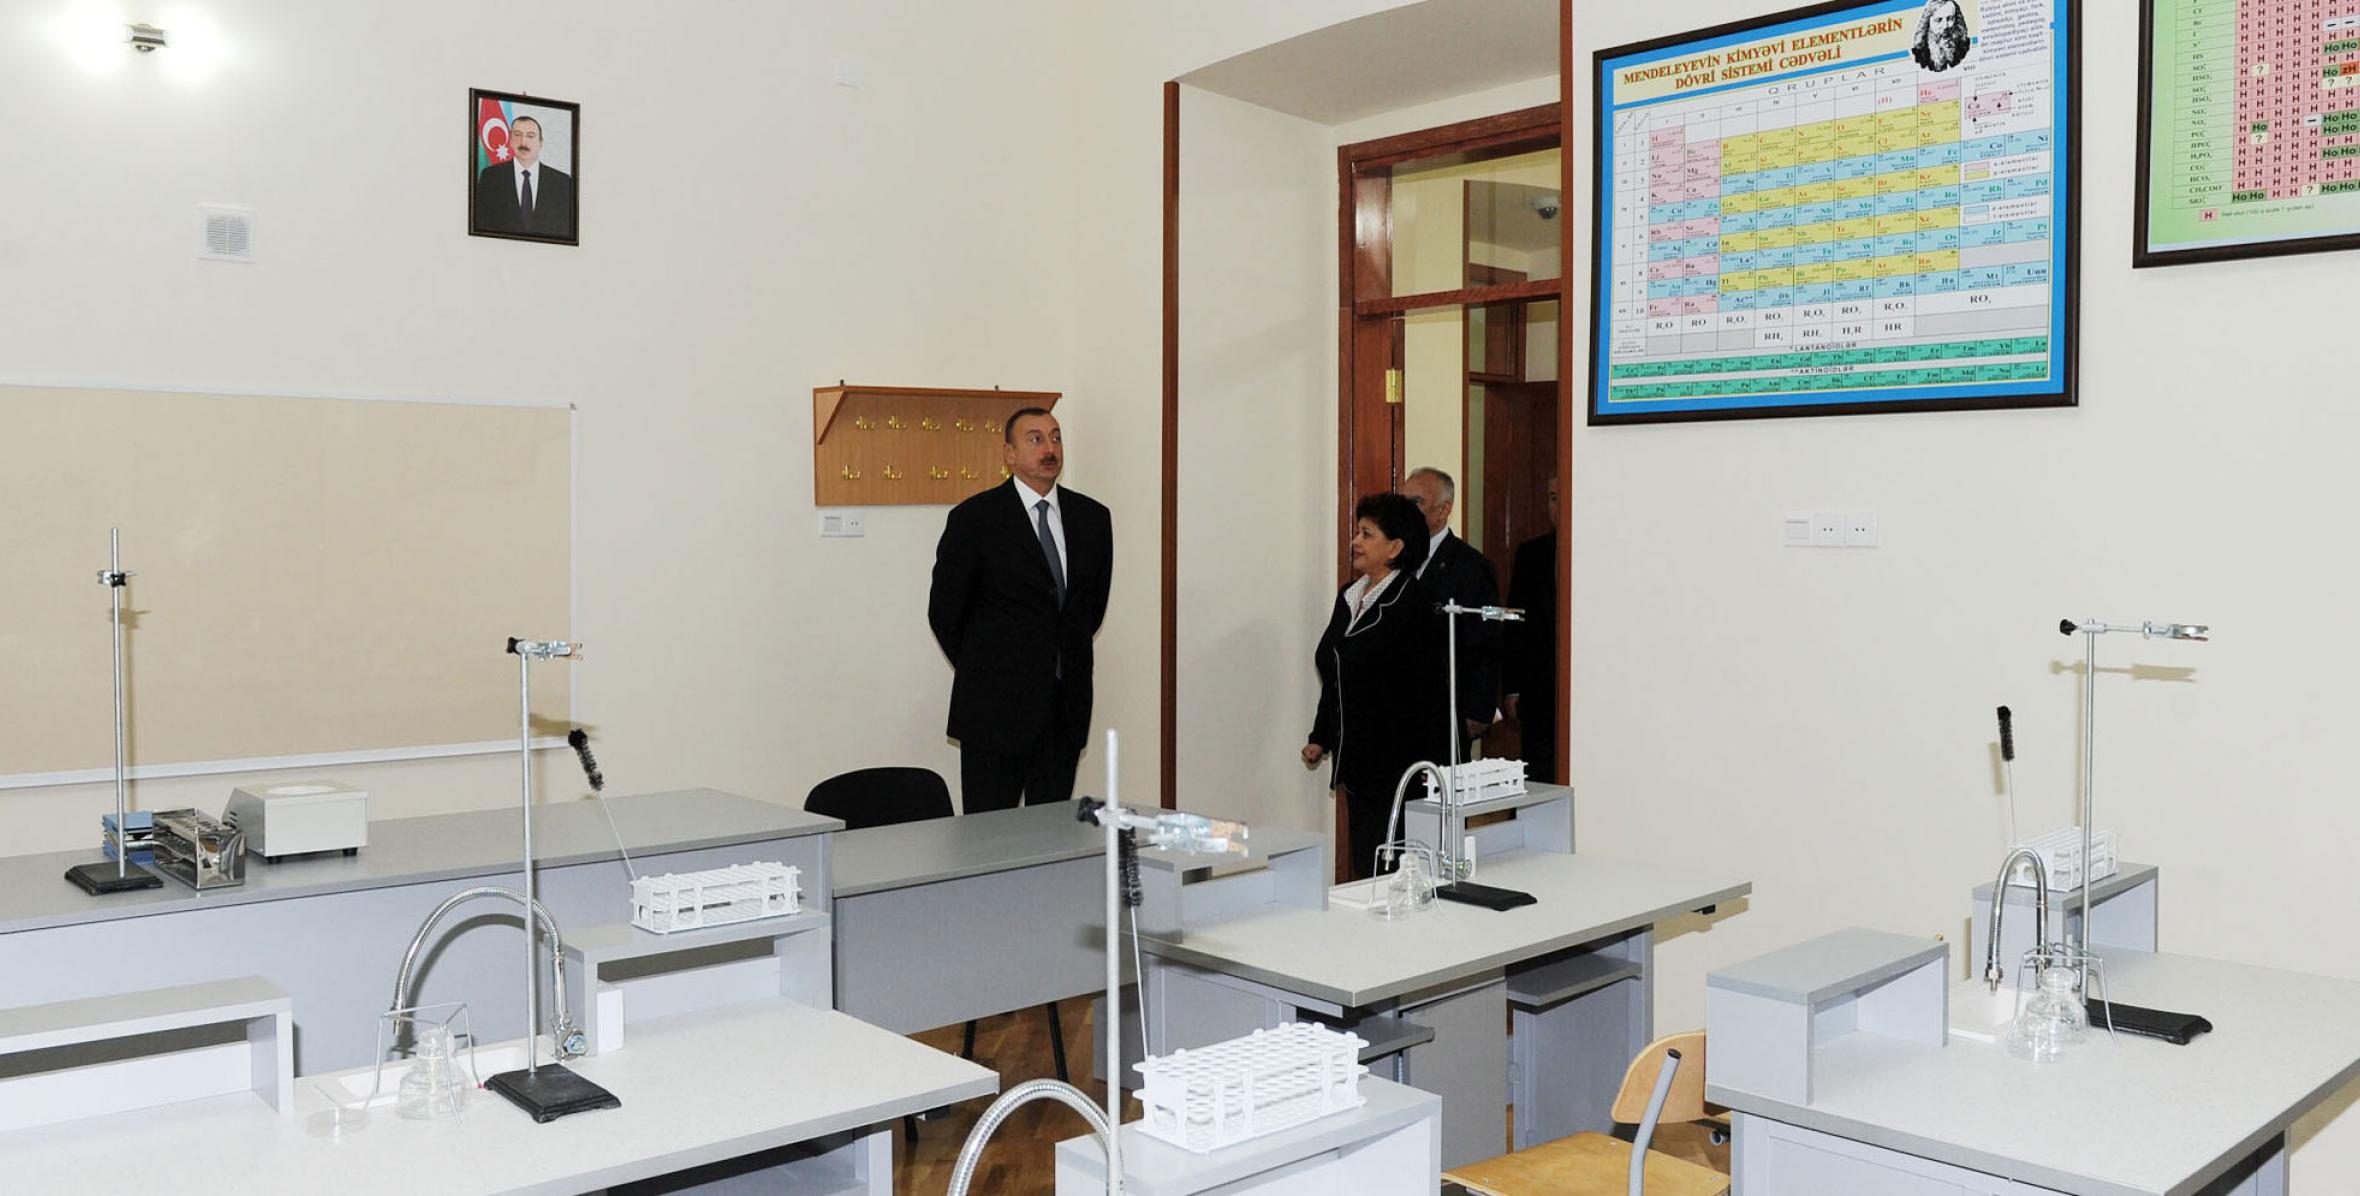 Ilham Aliyev reviewed secondary school No 1 in the Nasimi district of Baku after major overhaul and reconstruction